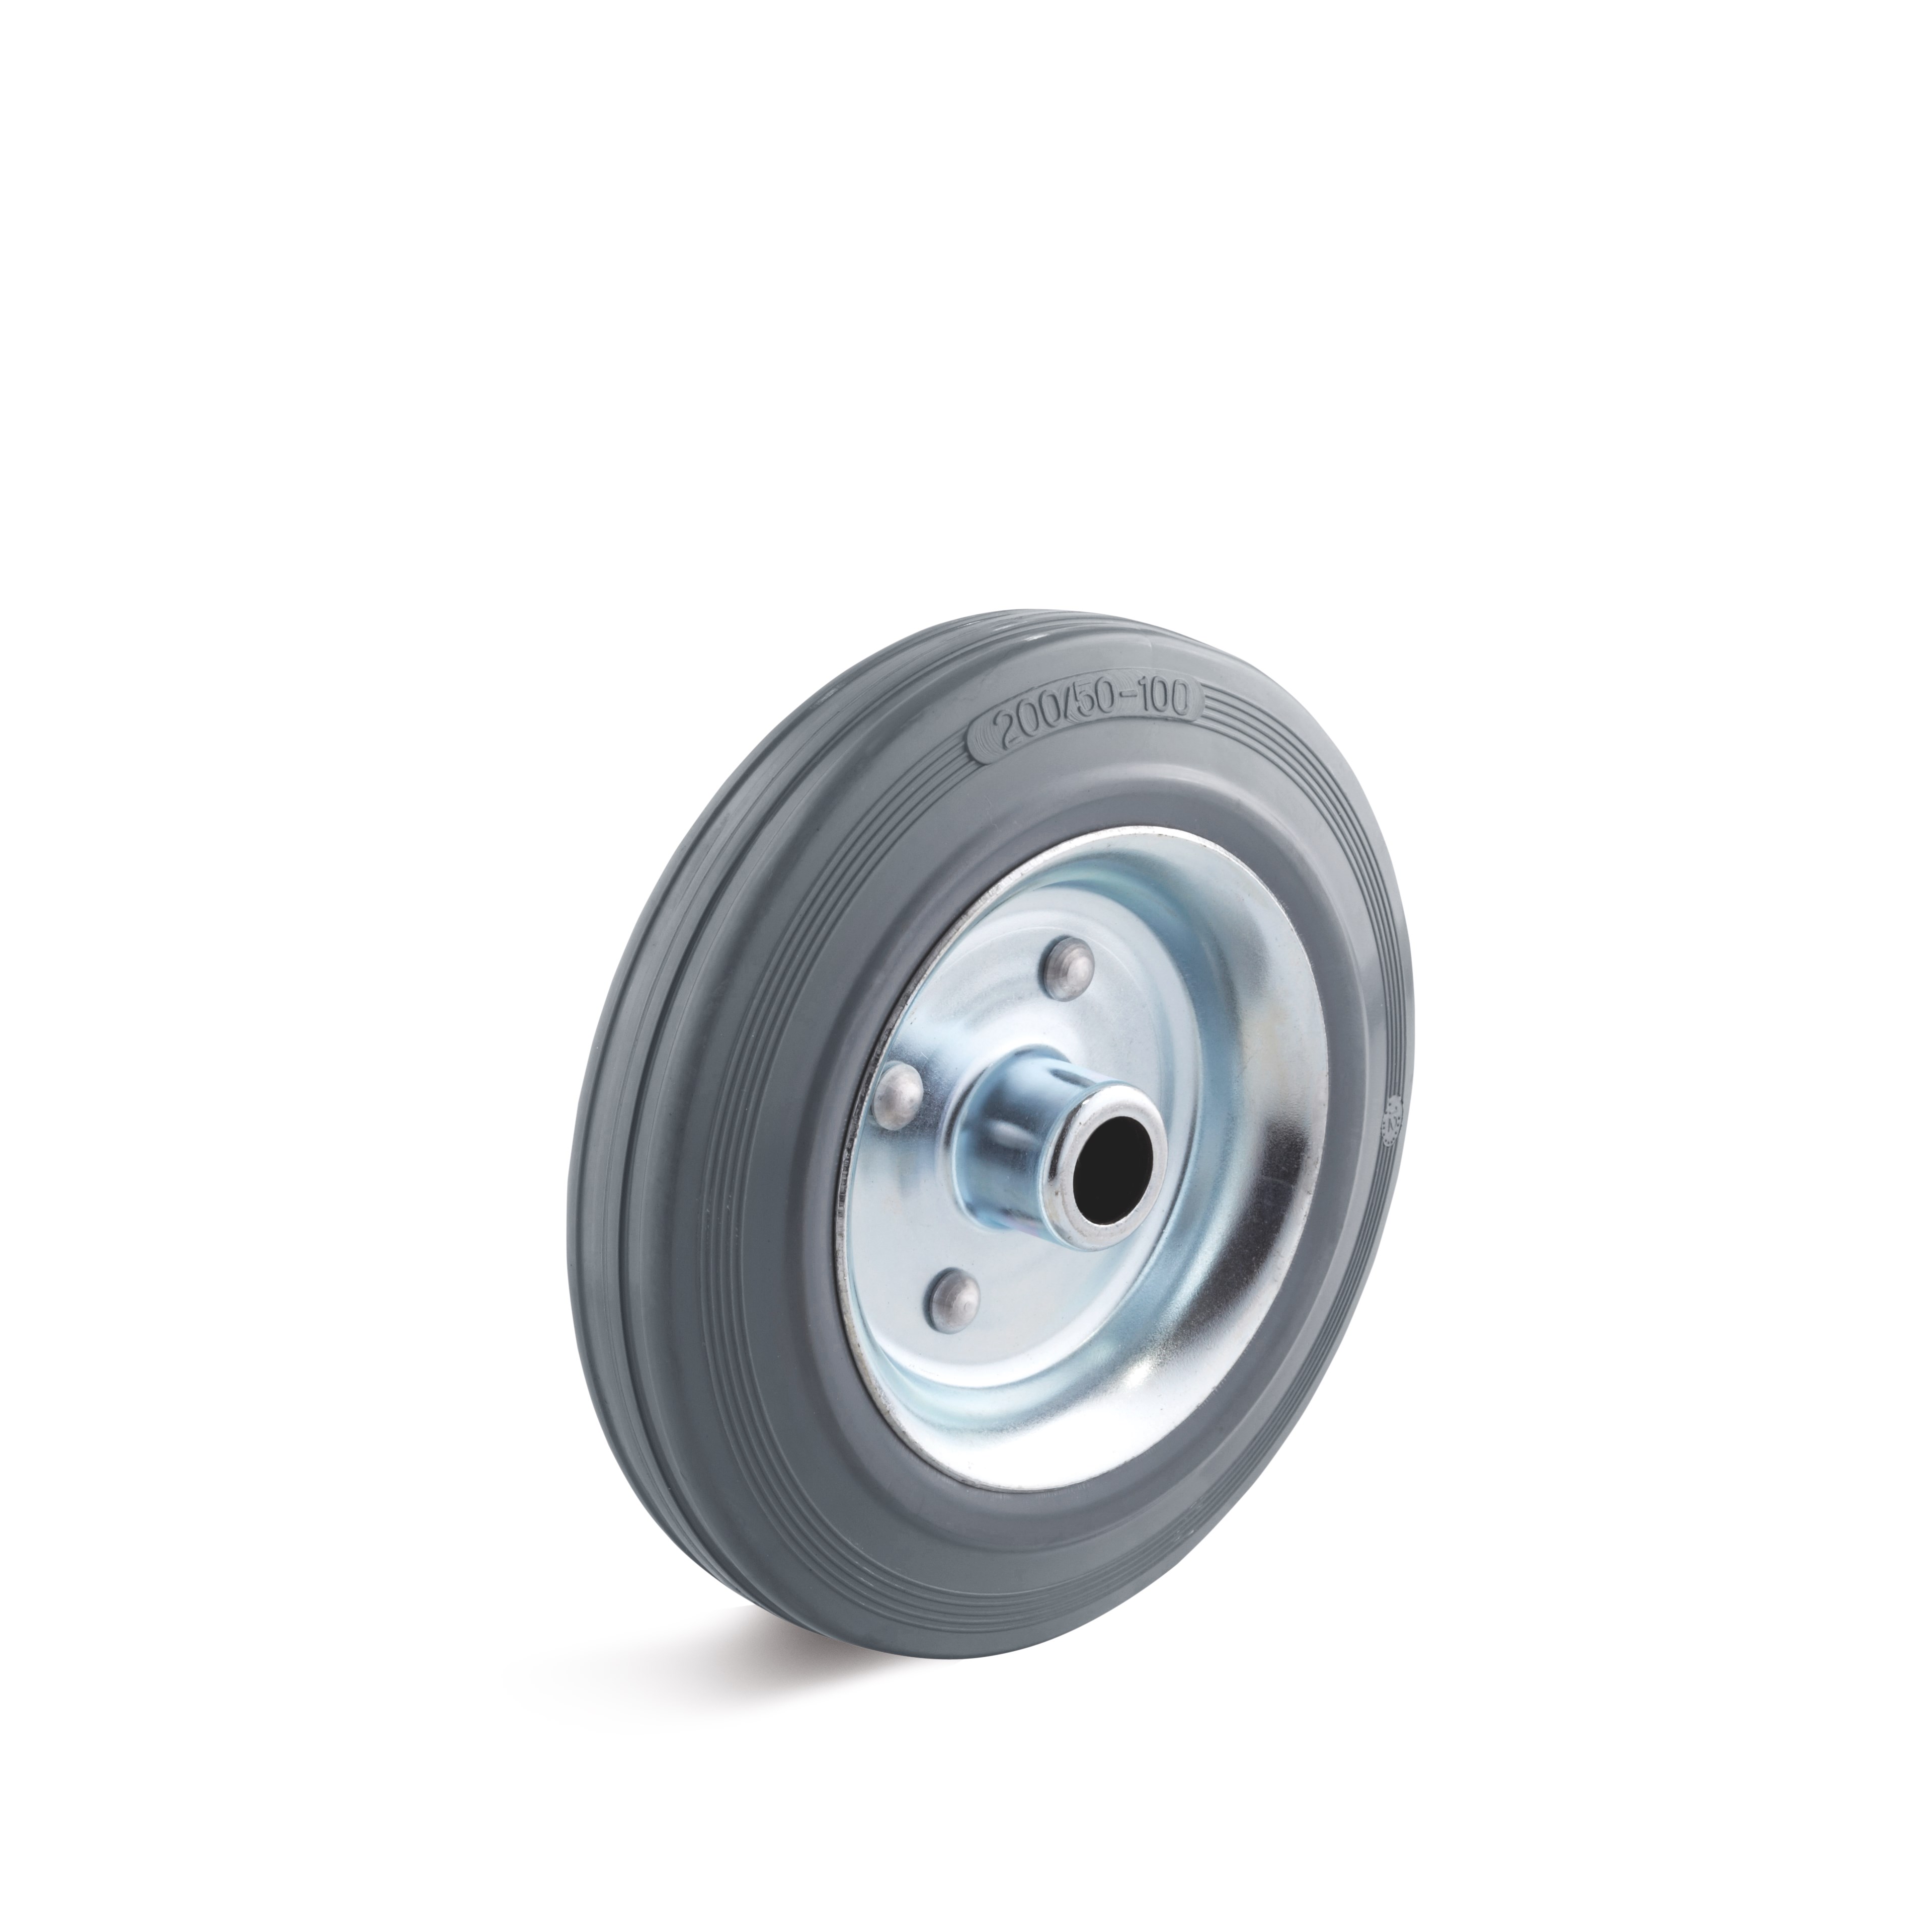 Solid rubber wheel with steel rim